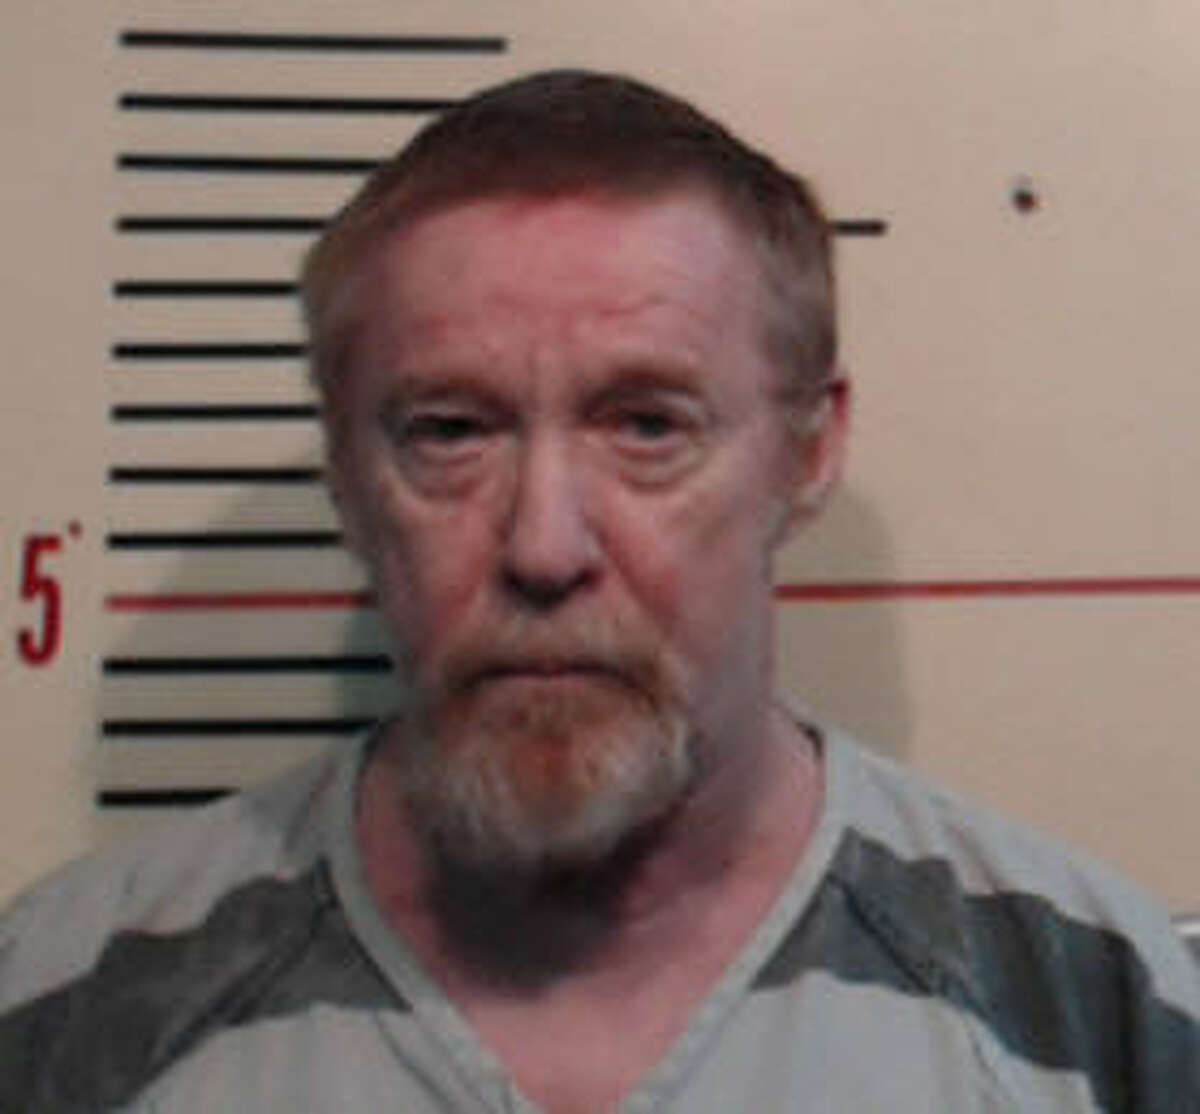 Ray Ivy Eberhardt, 62, was sentenced to life in prison after 10 DWI convictions, Jan. 20, 2016. (Parker County Sheriff's Office)